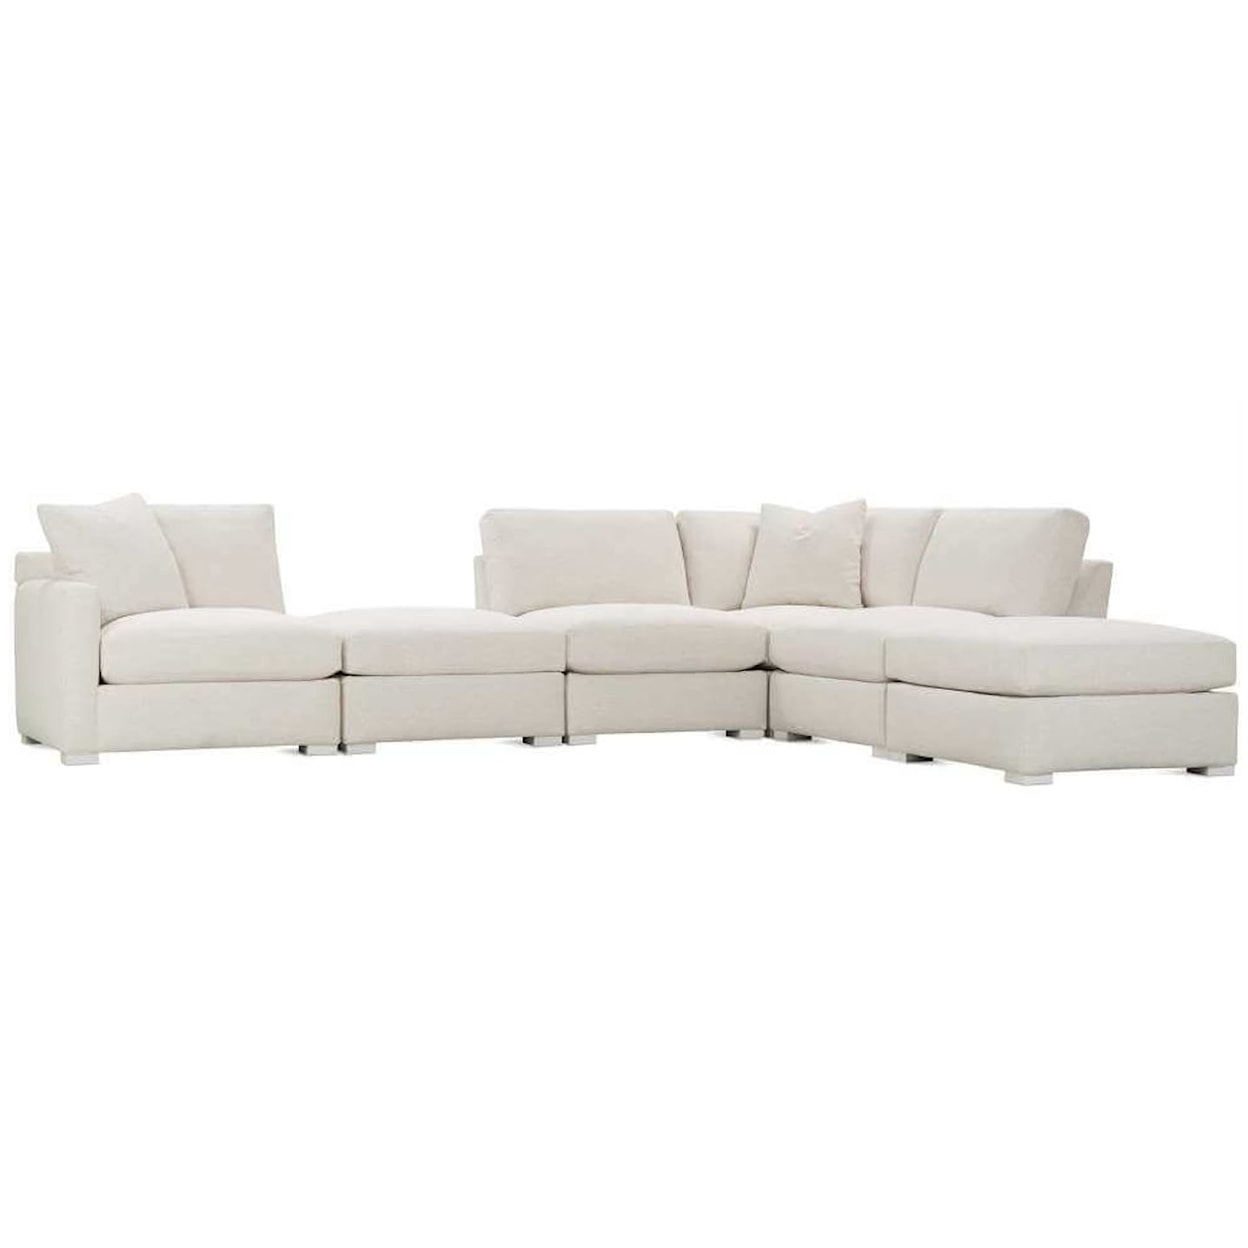 Rowe Asher Group Asher Six Piece Sectional